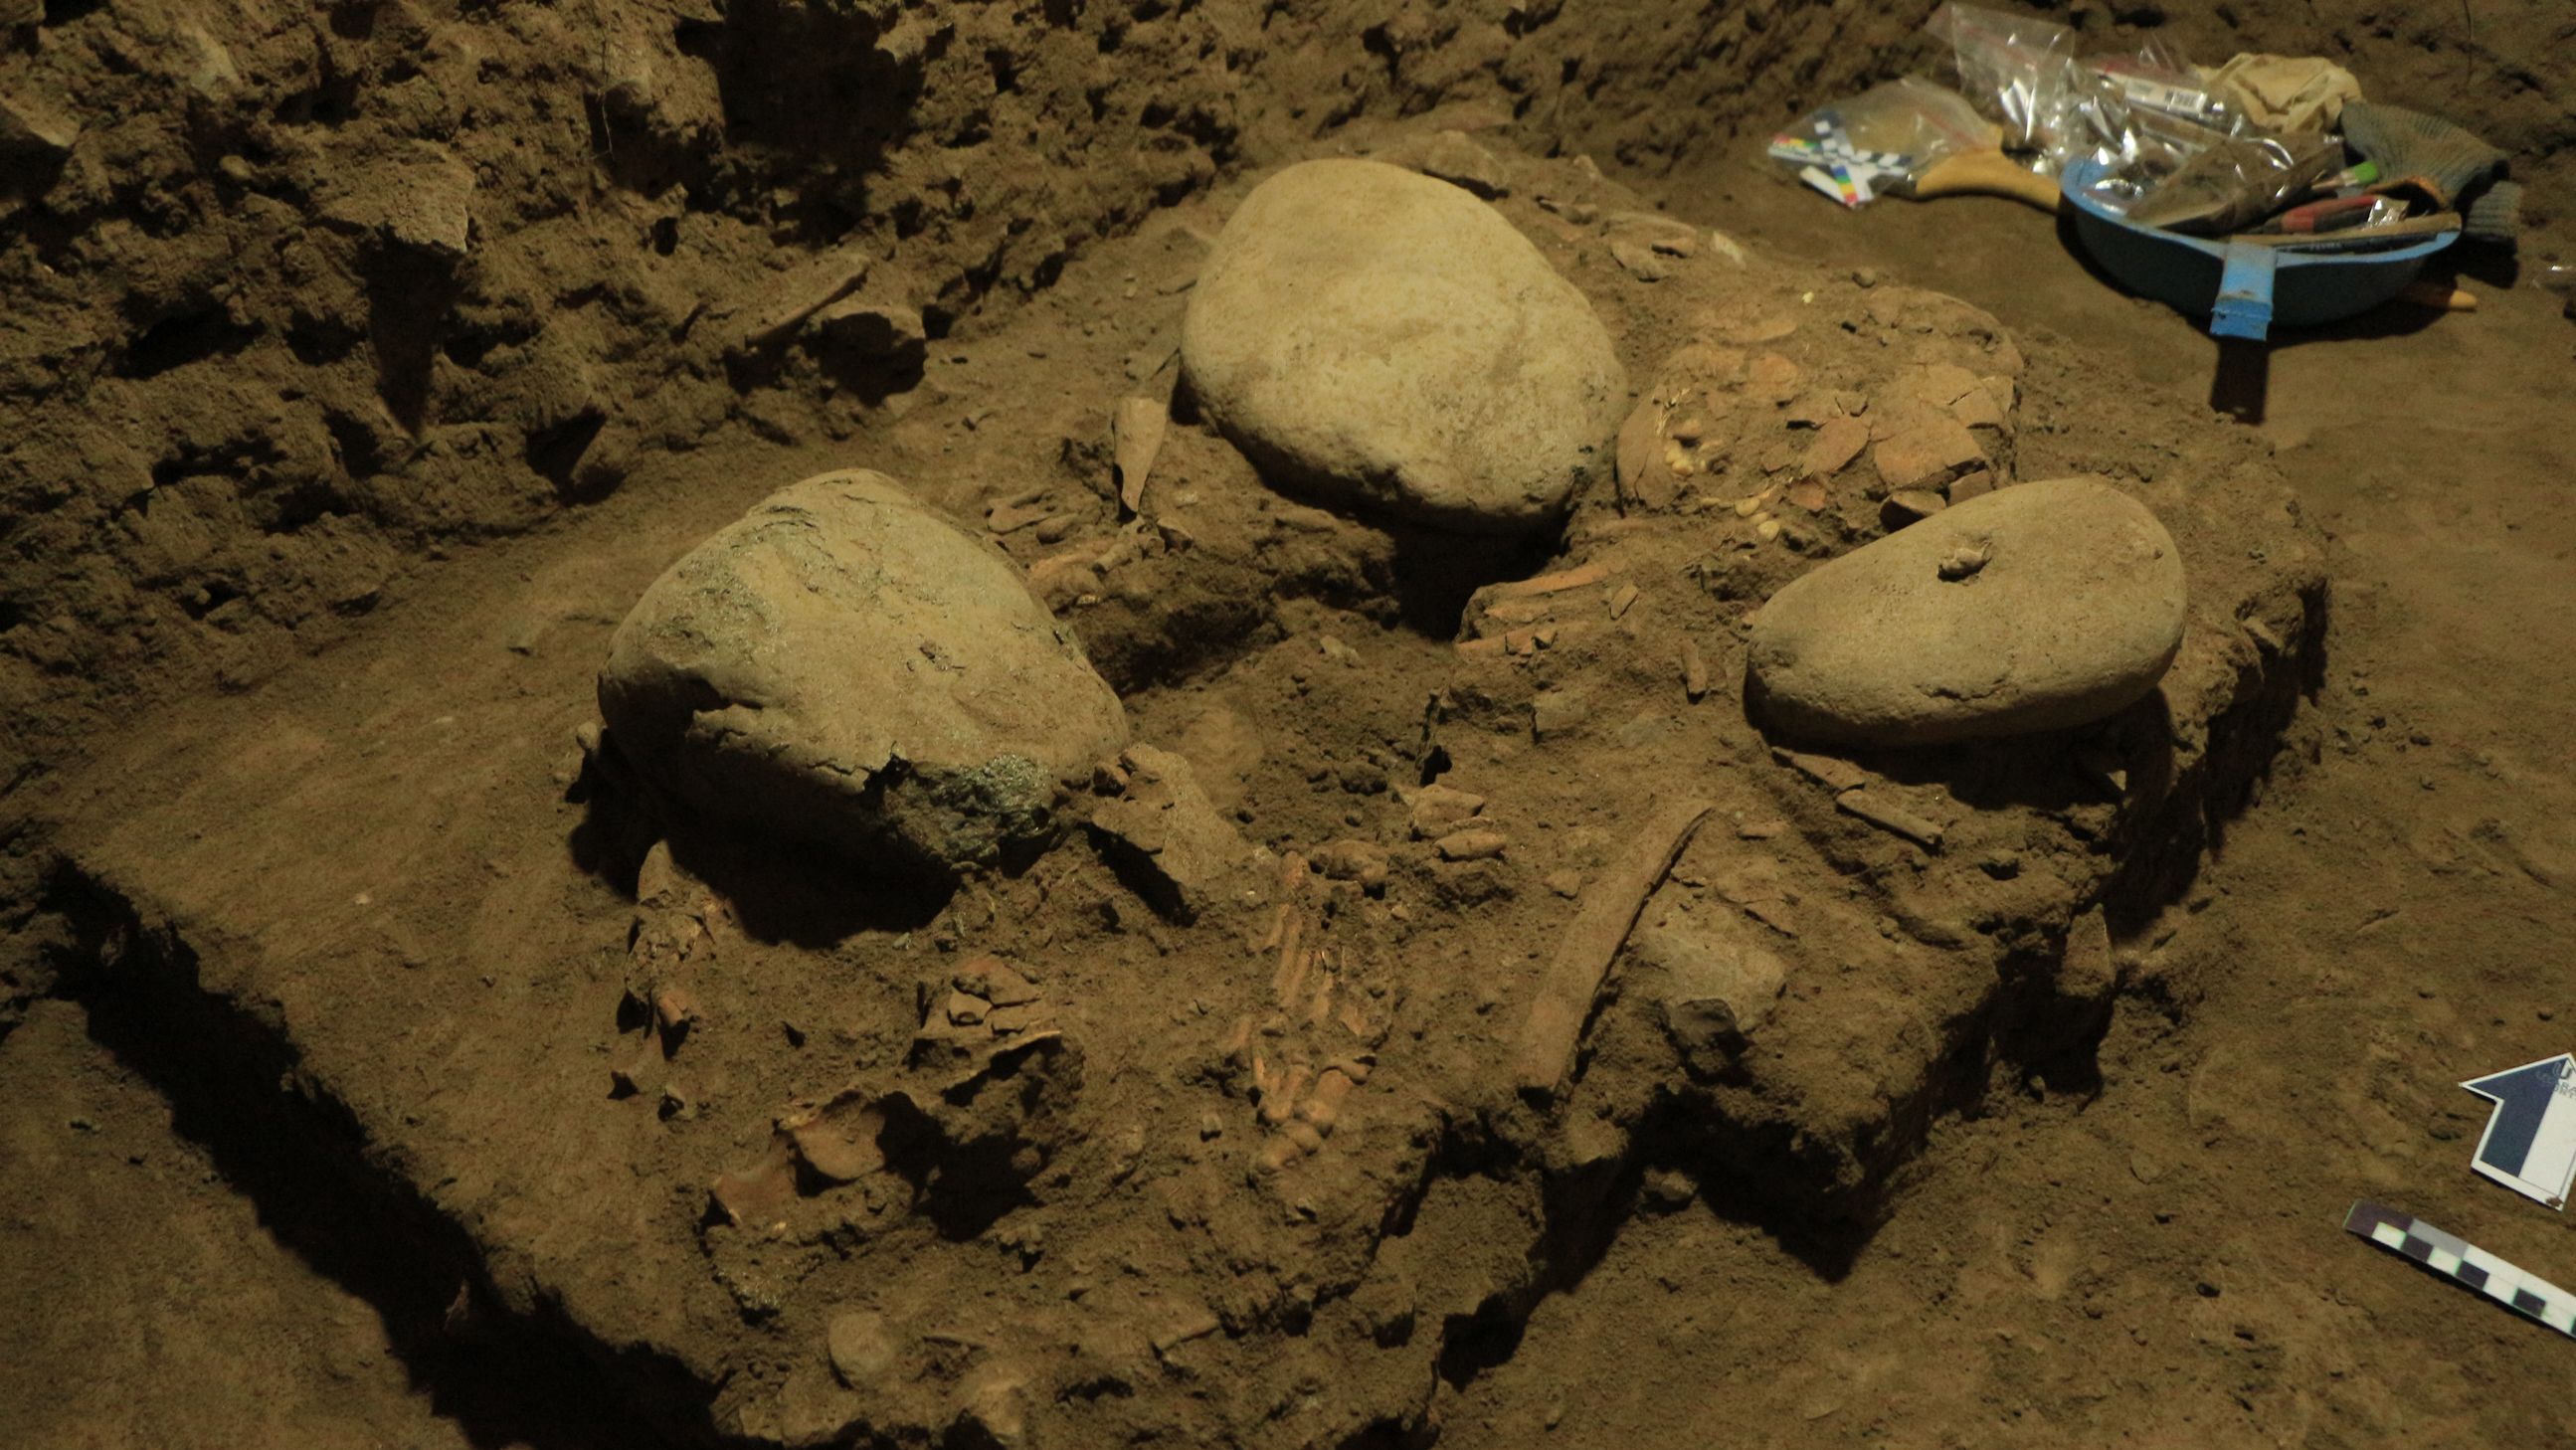 The skeletal remains of an ancient teenage Toalean woman were nestled among large rocks, which were placed in the burial pit discovered in a cave on Sulawesi.